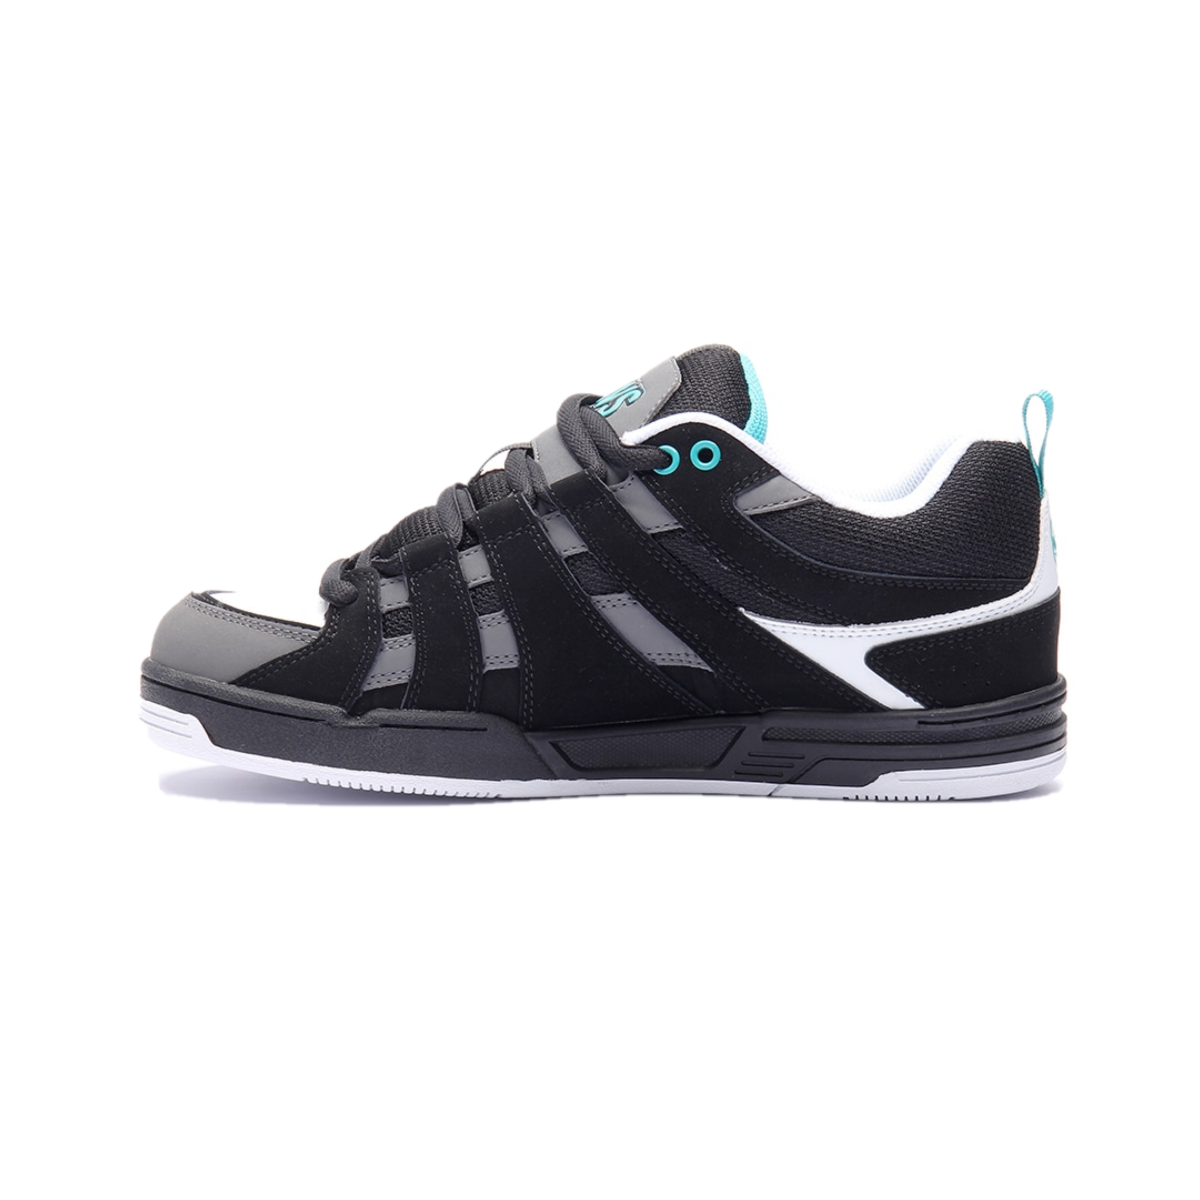 DVS F0000335001 PRIMO MN'S (Medium) Black/Charcoal/Turquoise Leather, Suede & Nubuck Skate Shoes